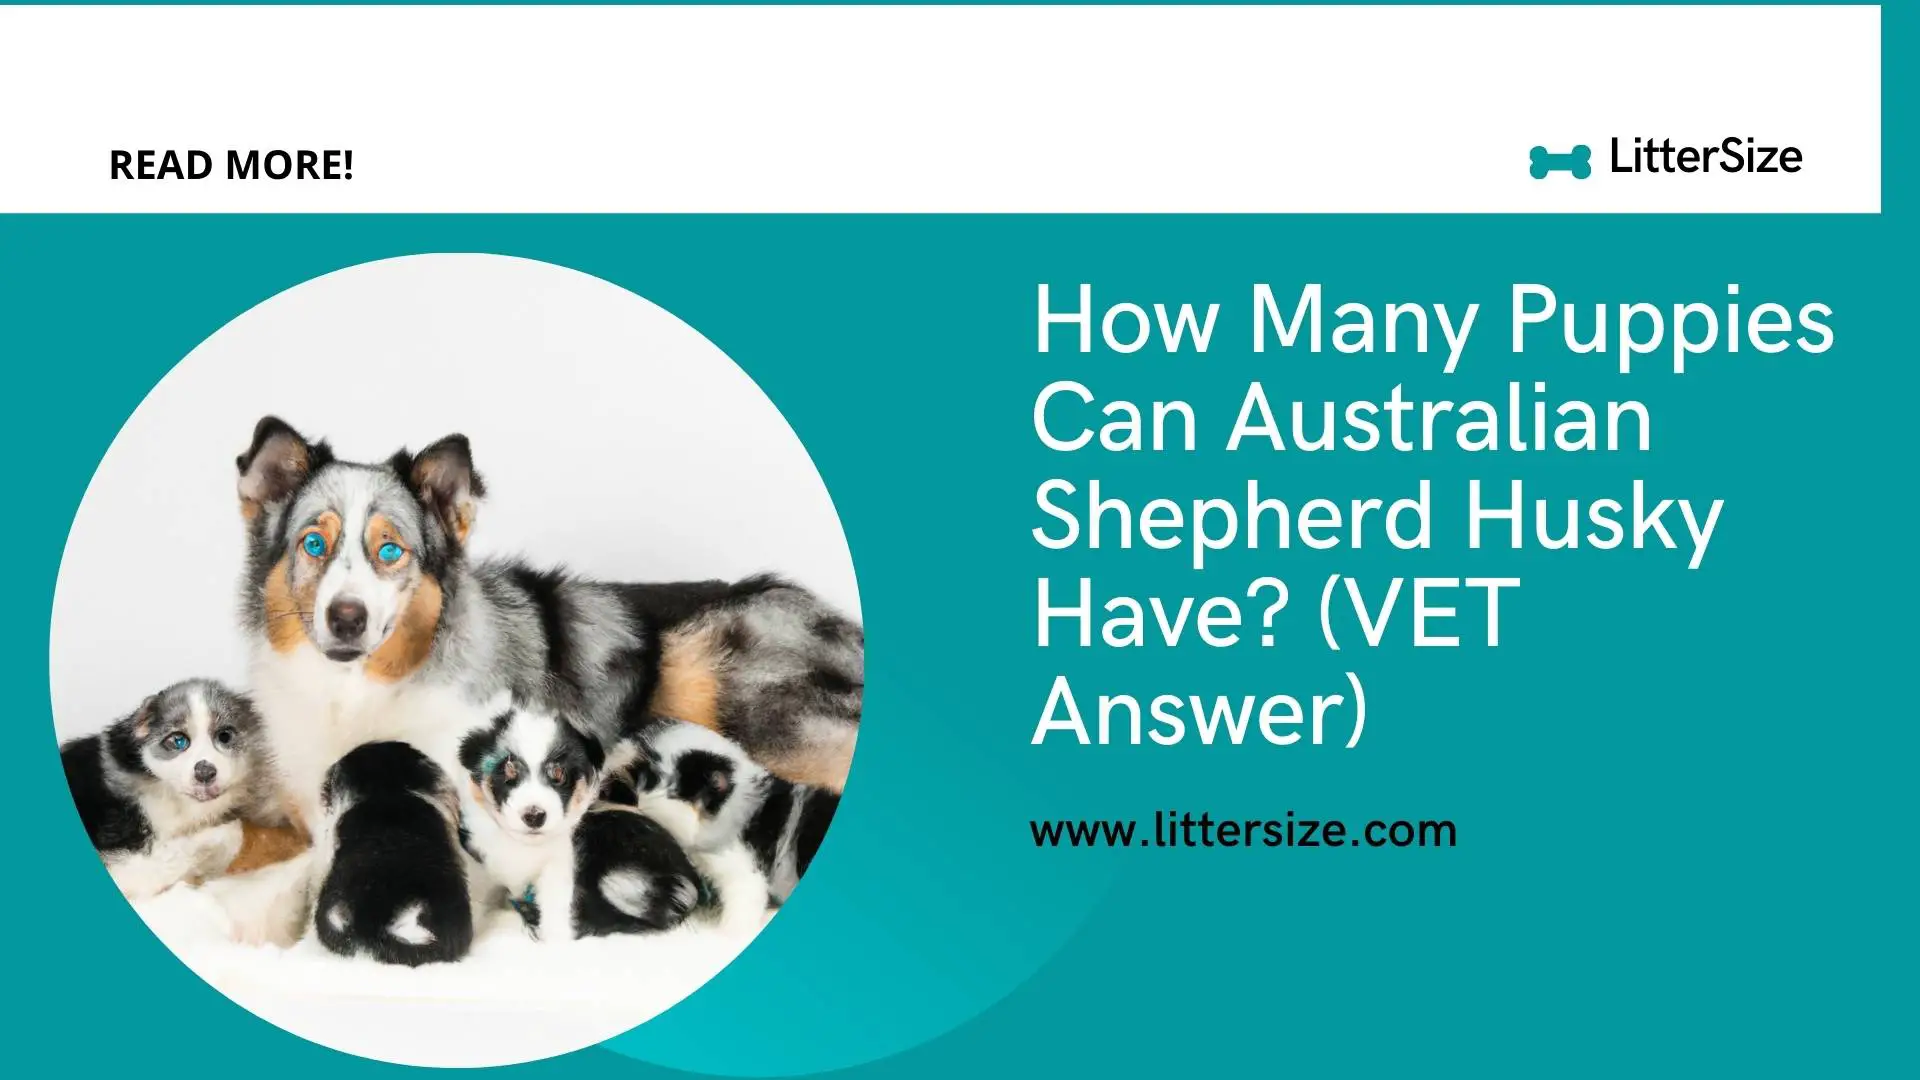 How Many Puppies Can Australian Shepherd Husky Have? (VET Answer)